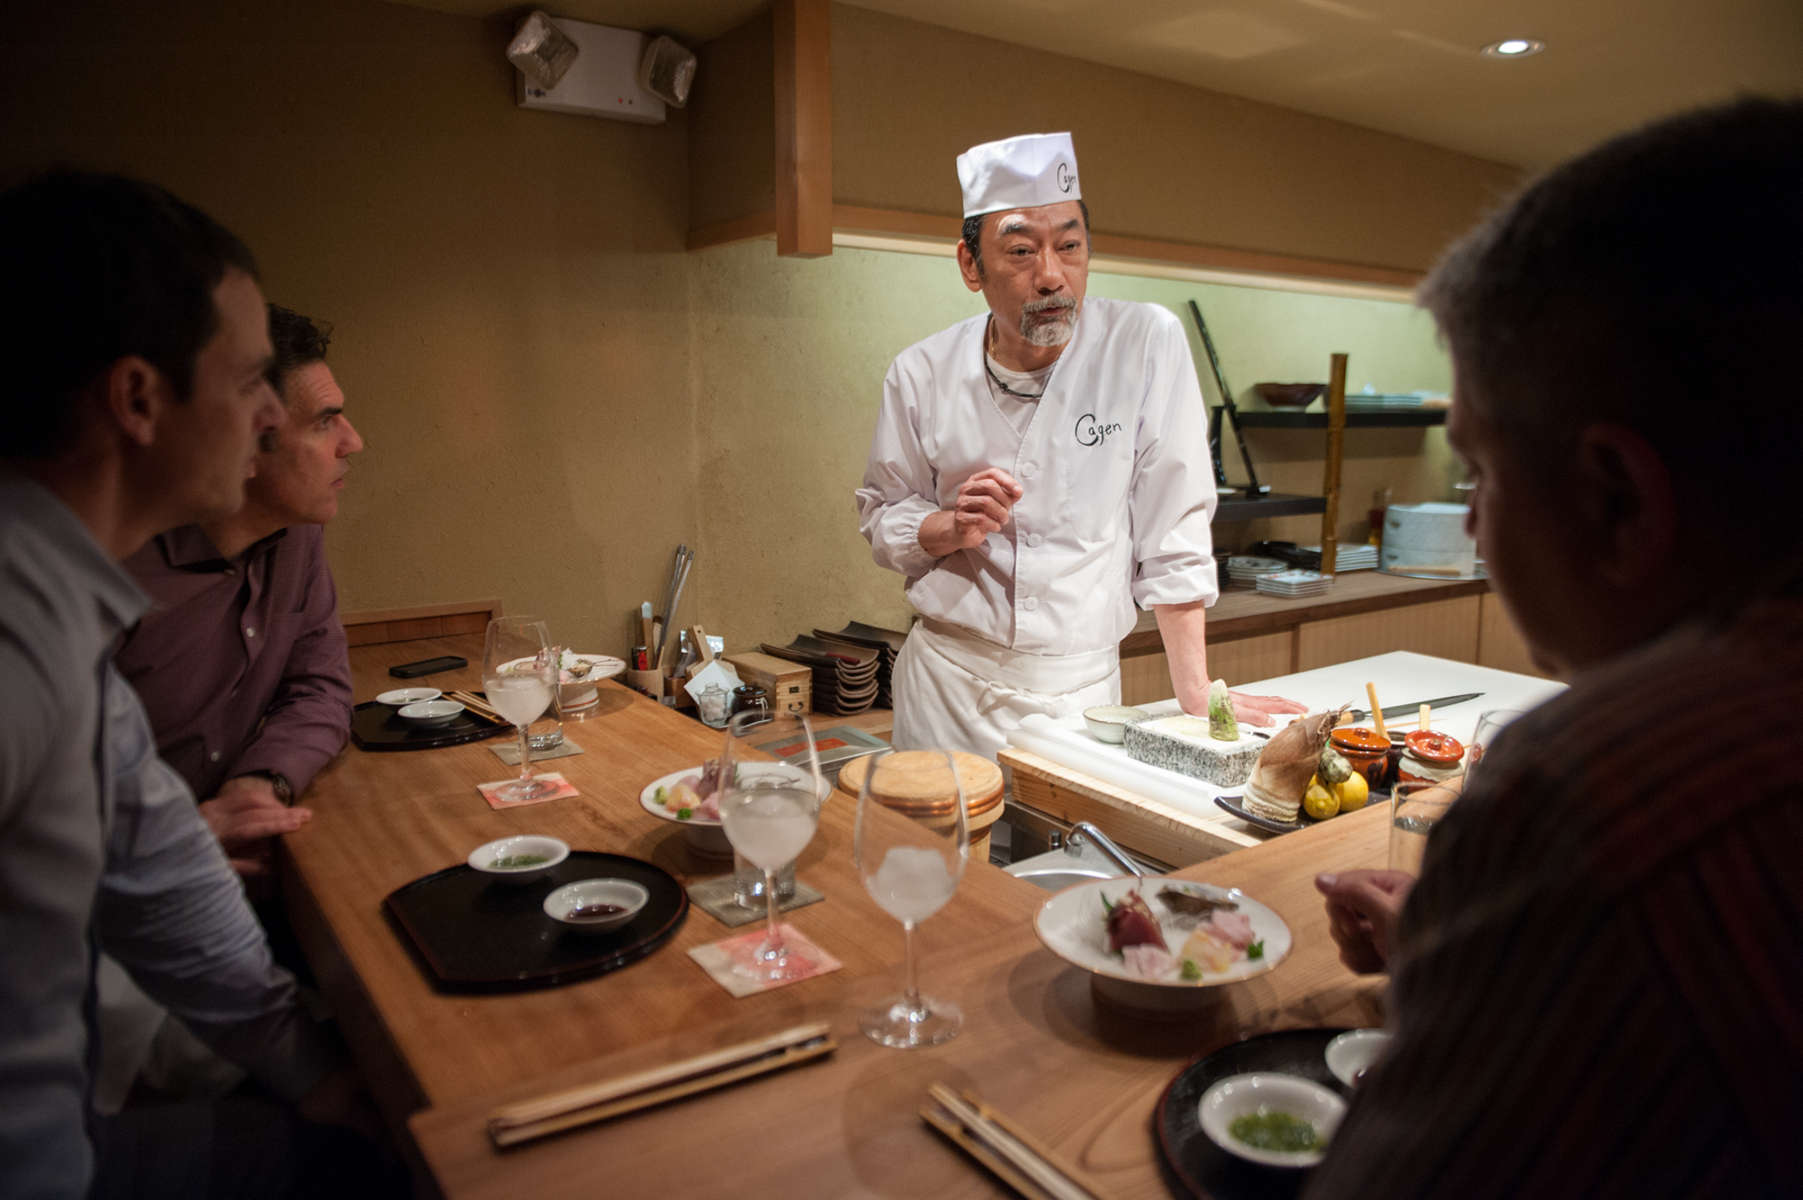 Chef Toshio Tomita presents diners with one of their many courses, offering up a collection of seafood items, such as Snapper, Grouper and baby Bluefish at this East Village establishment. (Apr. 23, 2014)Photo by Nancy Borowick